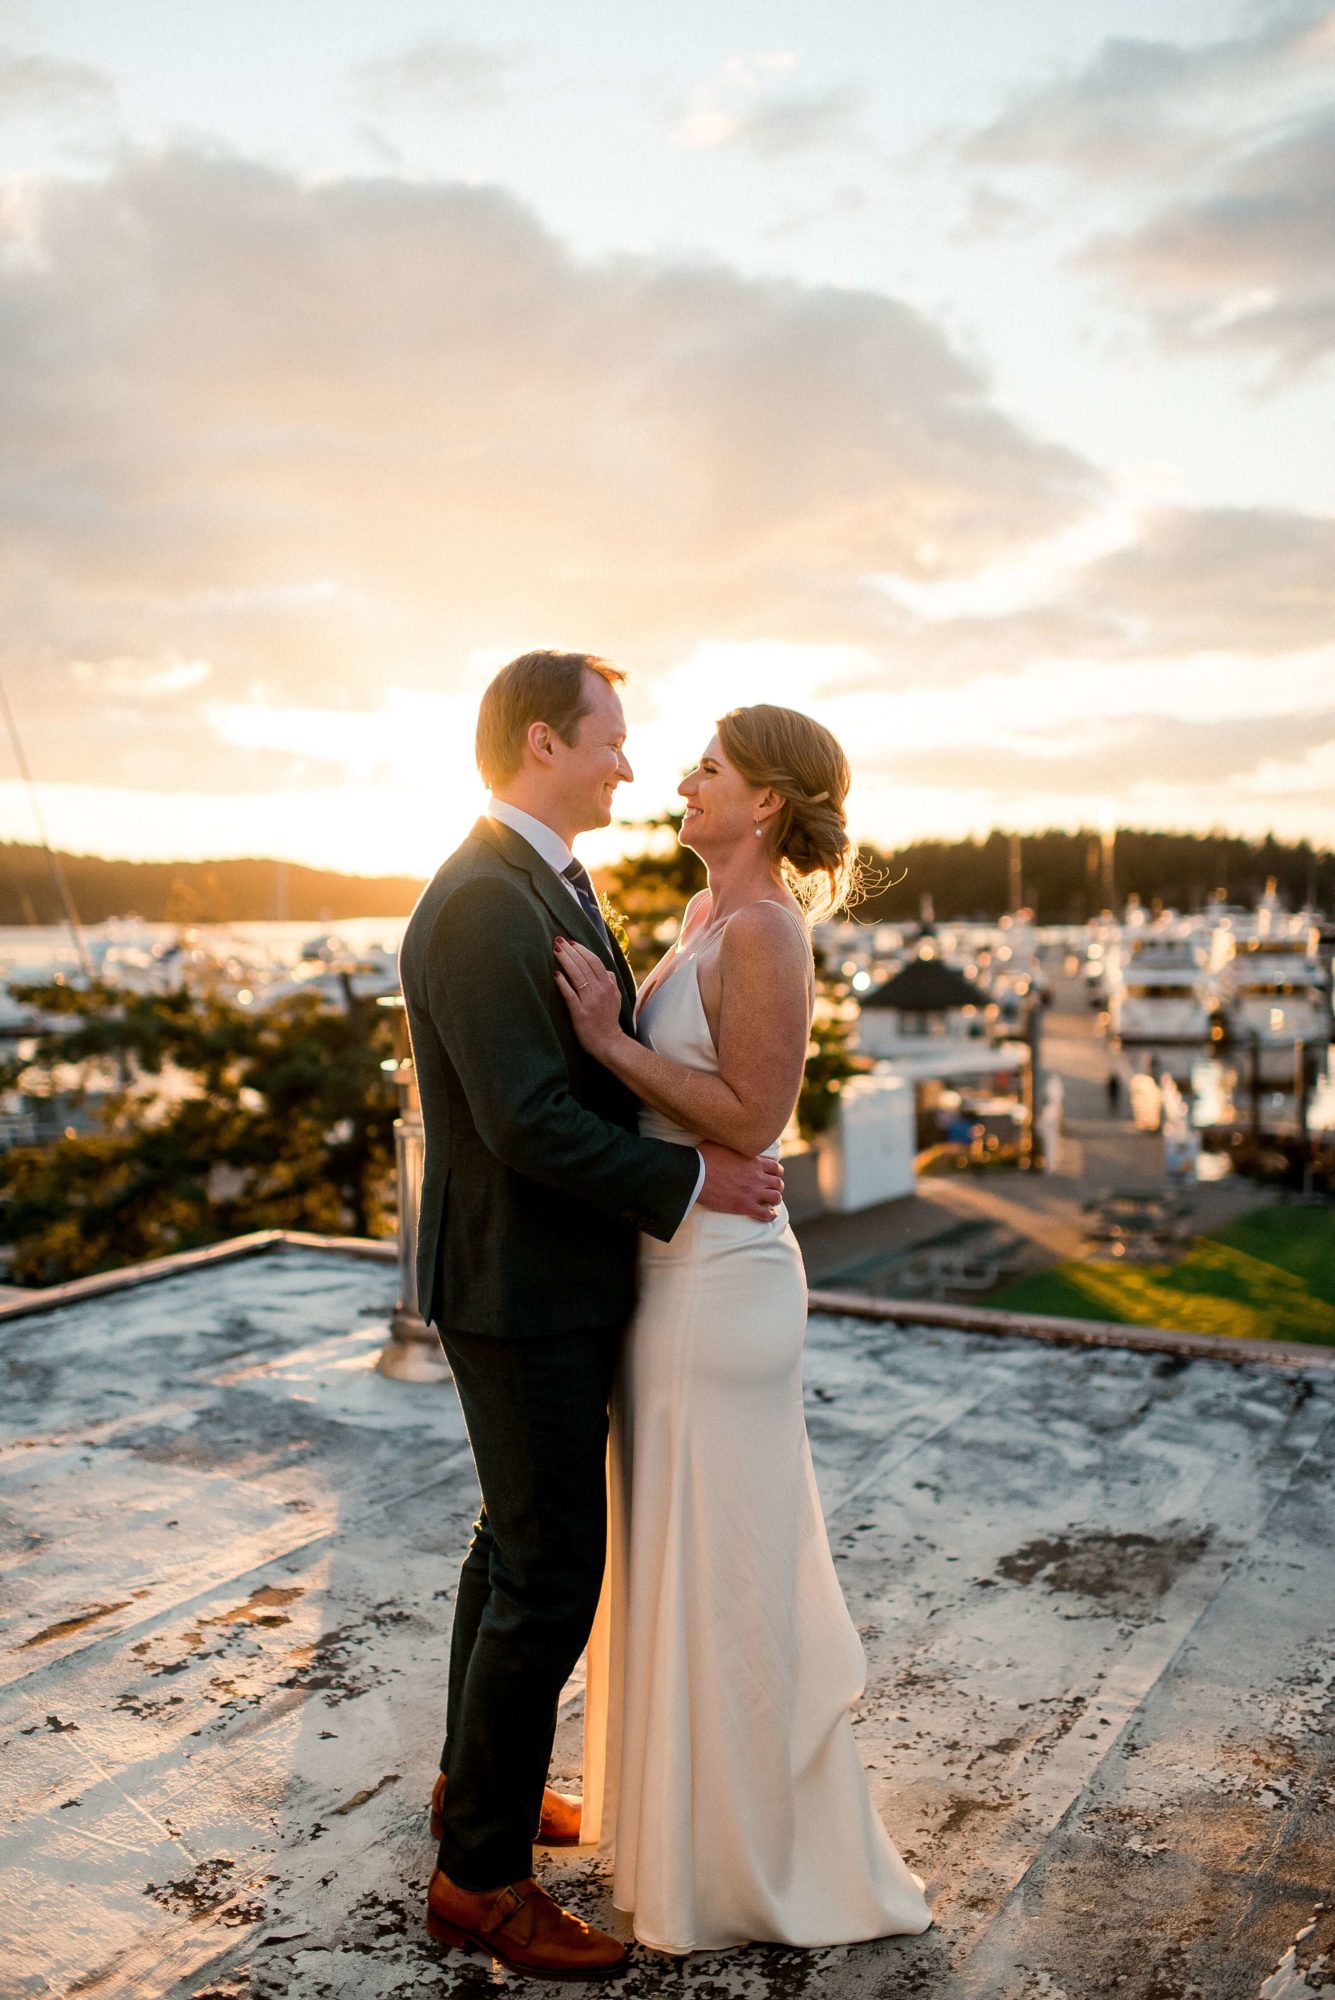 bride and groom standing on a roof overlooking the Roche Harbor Wedding venue at sunset